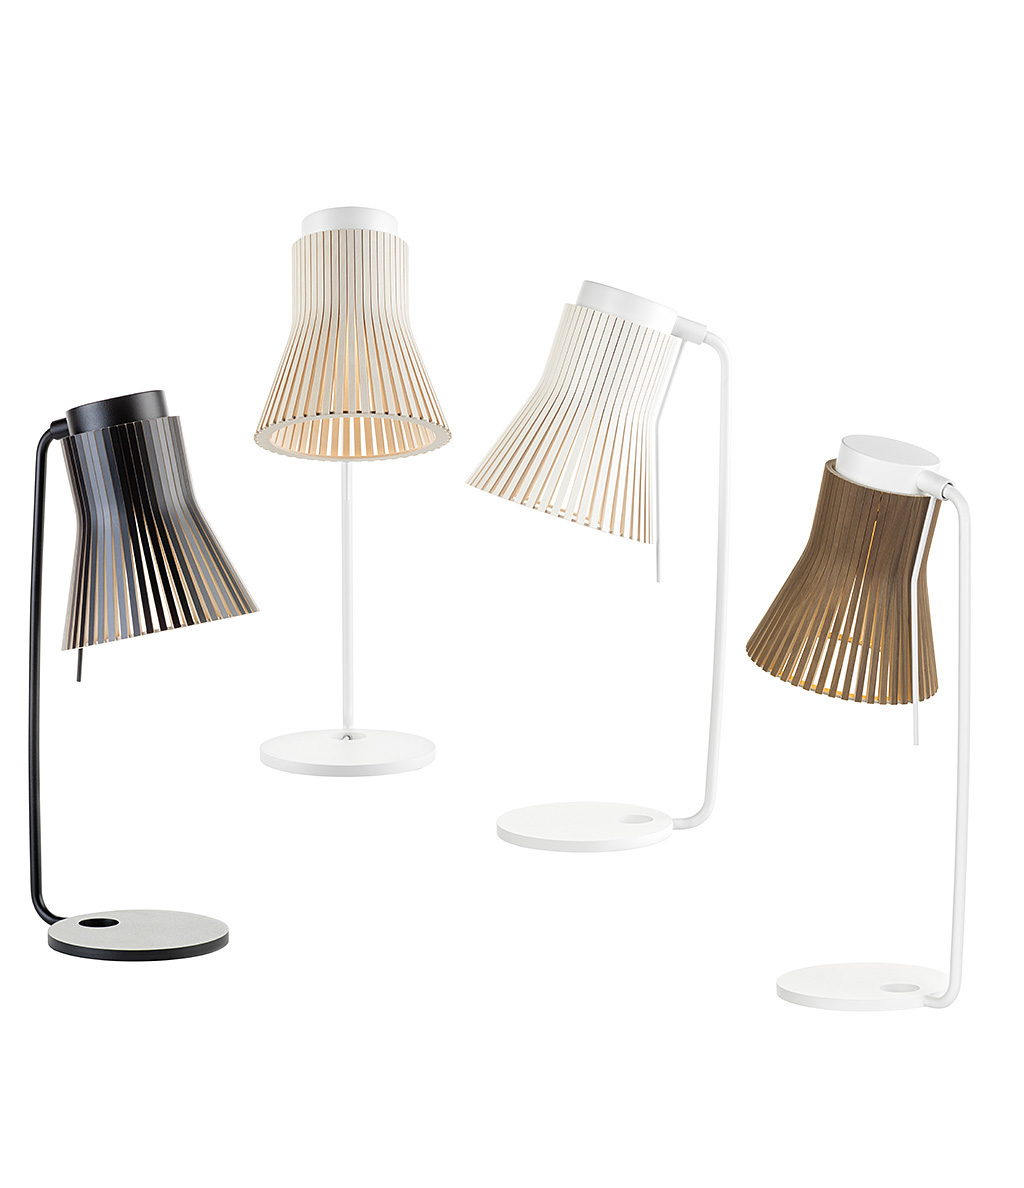 Secto Design Petite 4620 table lamp is available in four colours: birch, walnut, black and white.